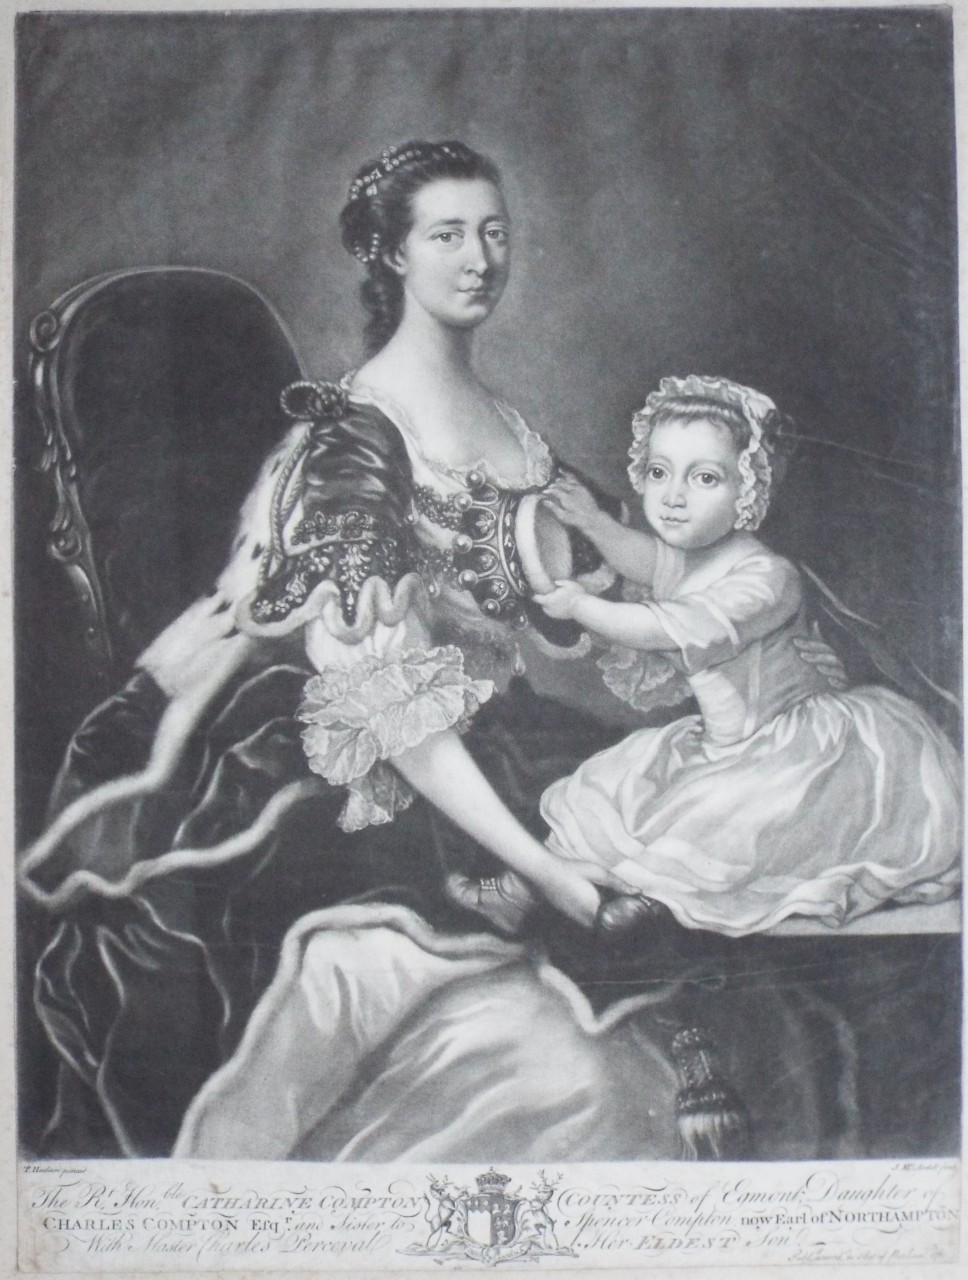 Mezzotint - The Rt. Honble Catherine Compton Countess of Egmont, Daughter of Charles Compton Esqr. and Sister to Spencer Compton, now Earl of Northampton. With Master Charles Perceval Her Eldest Son. - Mc.Ardell